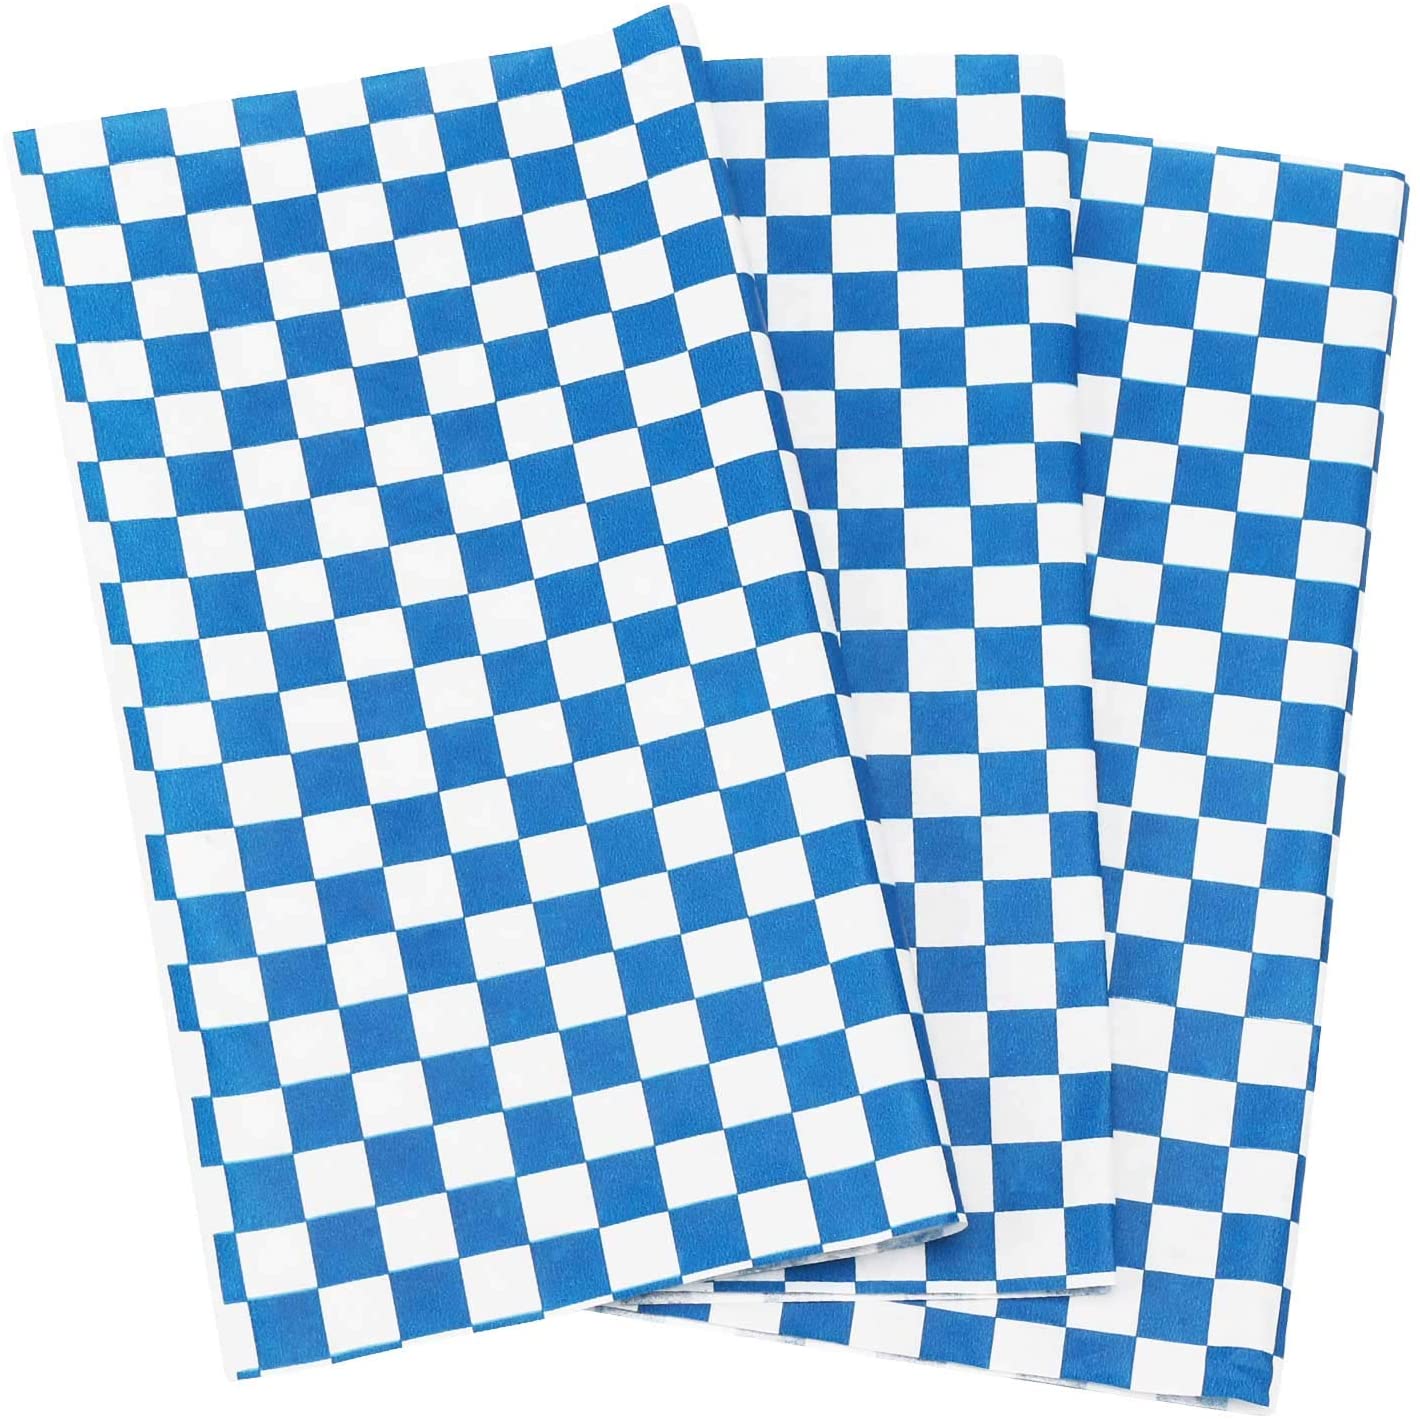 Deli Paper Sheets Sandwich Wrap Paper - 12x12 Food Wrapping Grease  Resistant Checkered Liner Papers, Perfect for Restaurants, Barbecues,  Picnics, Parties, Kids Meals, Outdoors - 250 Sheets